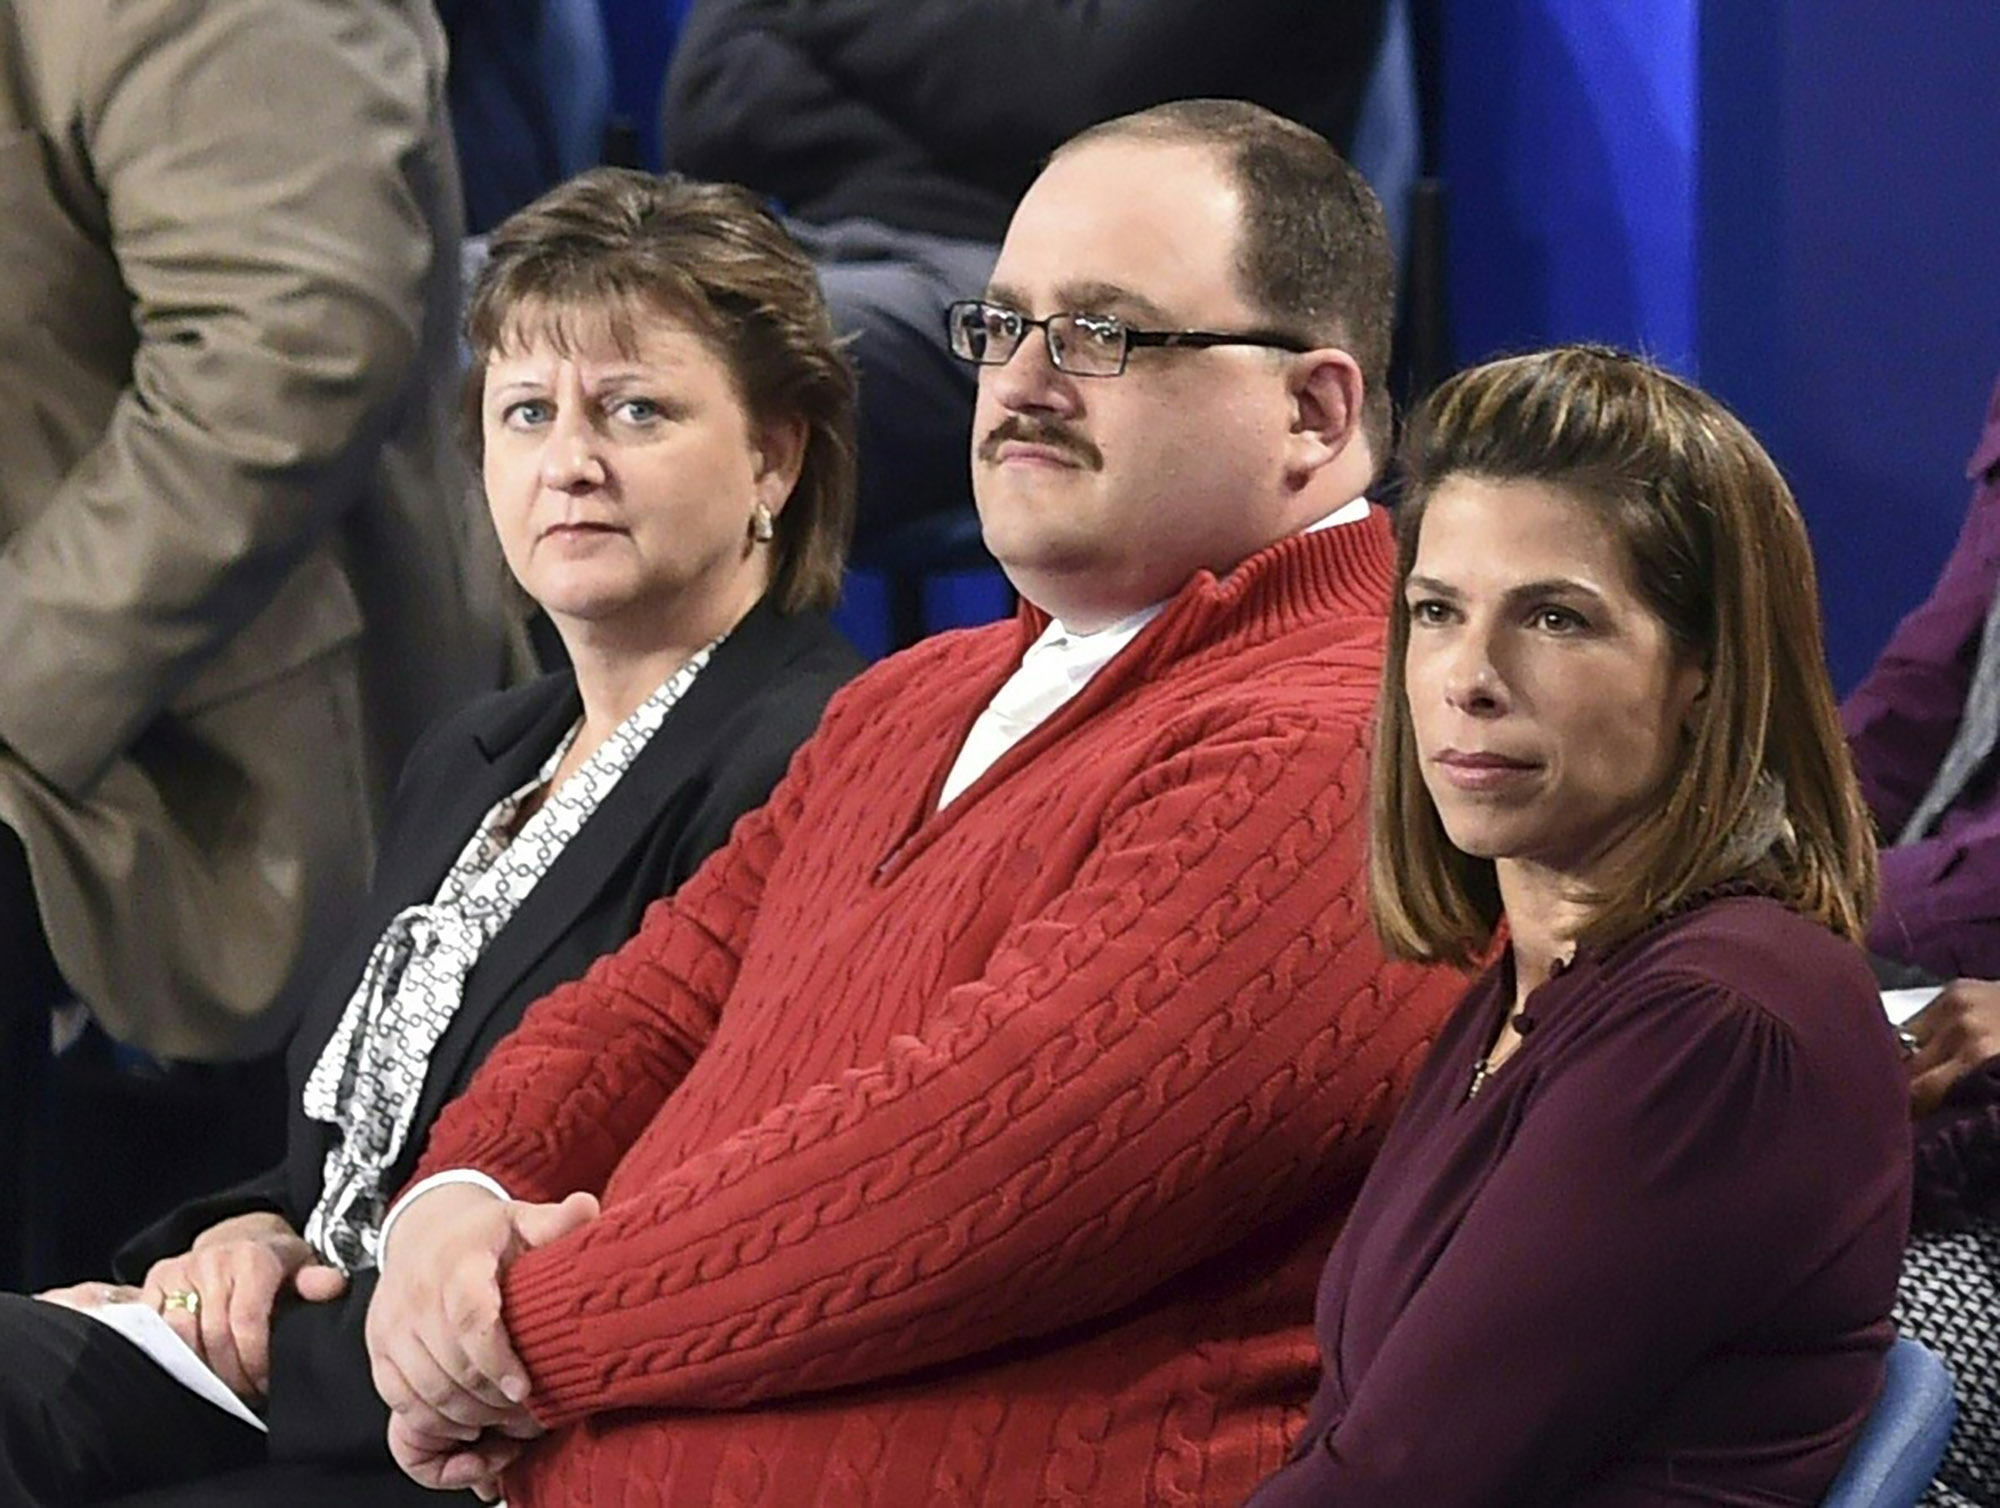 Ken Bone (C) listens to US Democratic nominee Hillary Clinton and Republican nominee Donald Trump during the second presidential debate at Washington University in St. Louis, Missouri.  (PAUL J. RICHARDS/AFP/Getty Images) (PAUL J. RICHARDS&mdash;AFP/Getty Images)